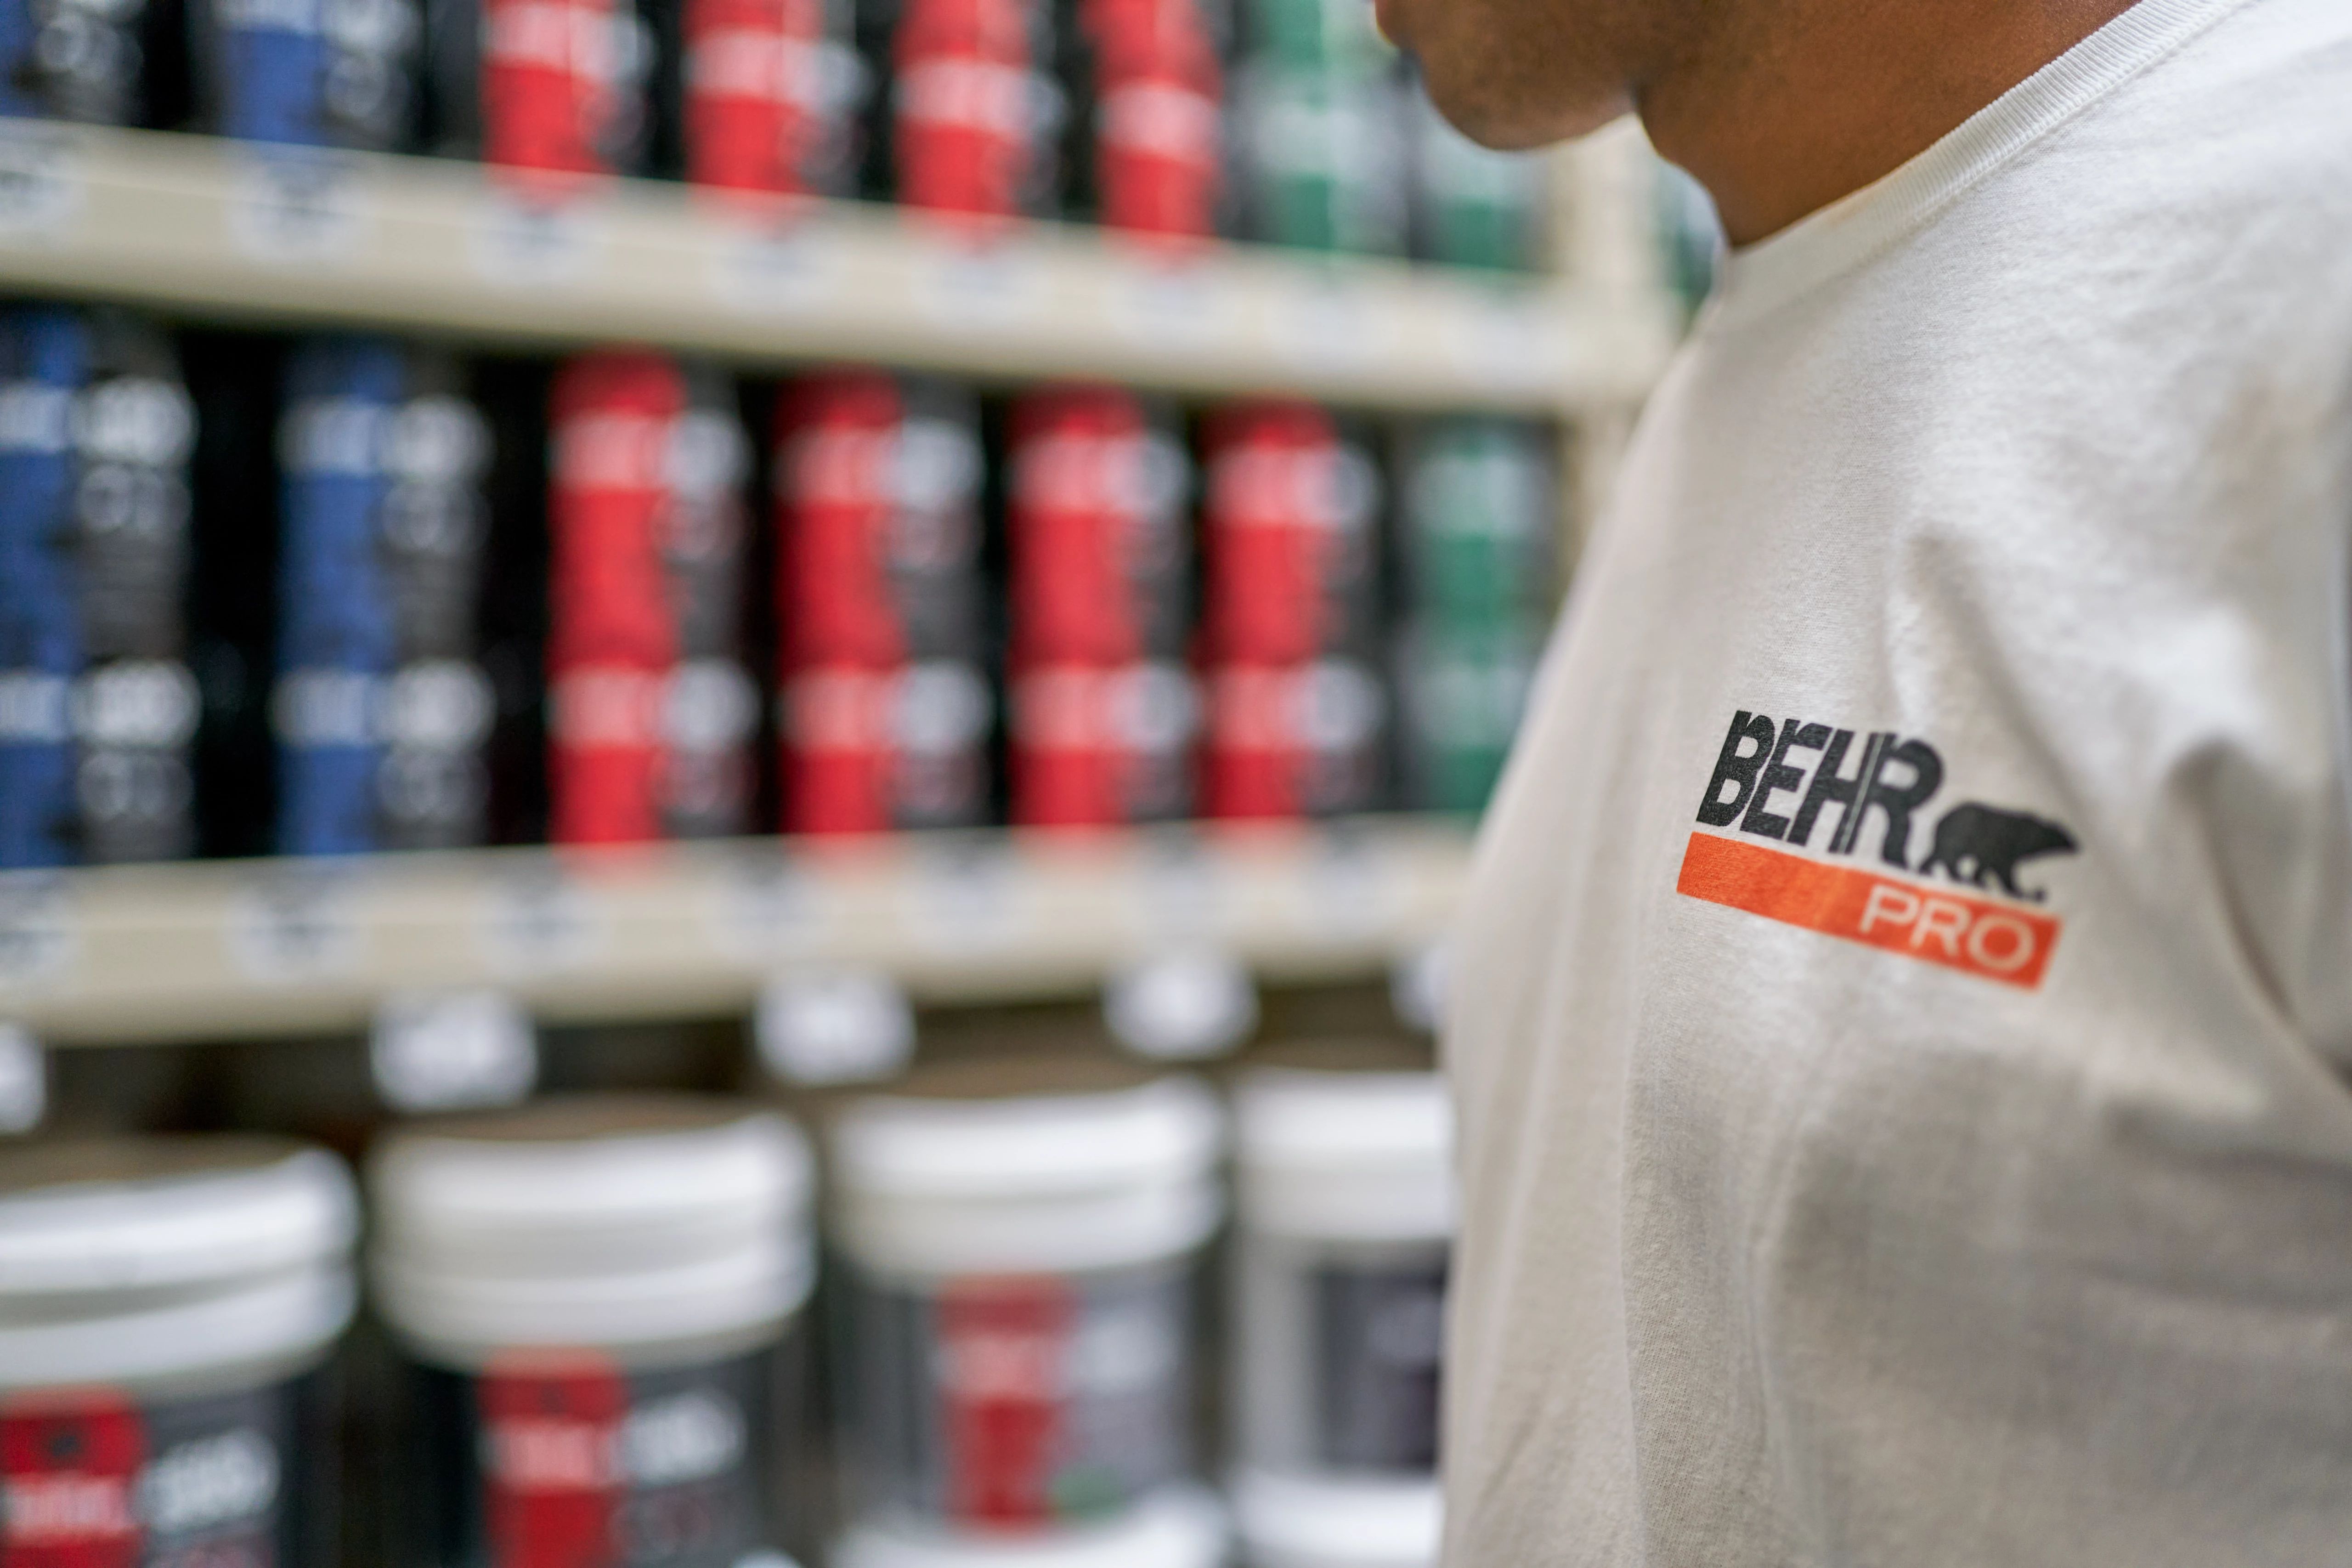 Behr Pro Painter looking at 5 gallon BEHR paint buckets